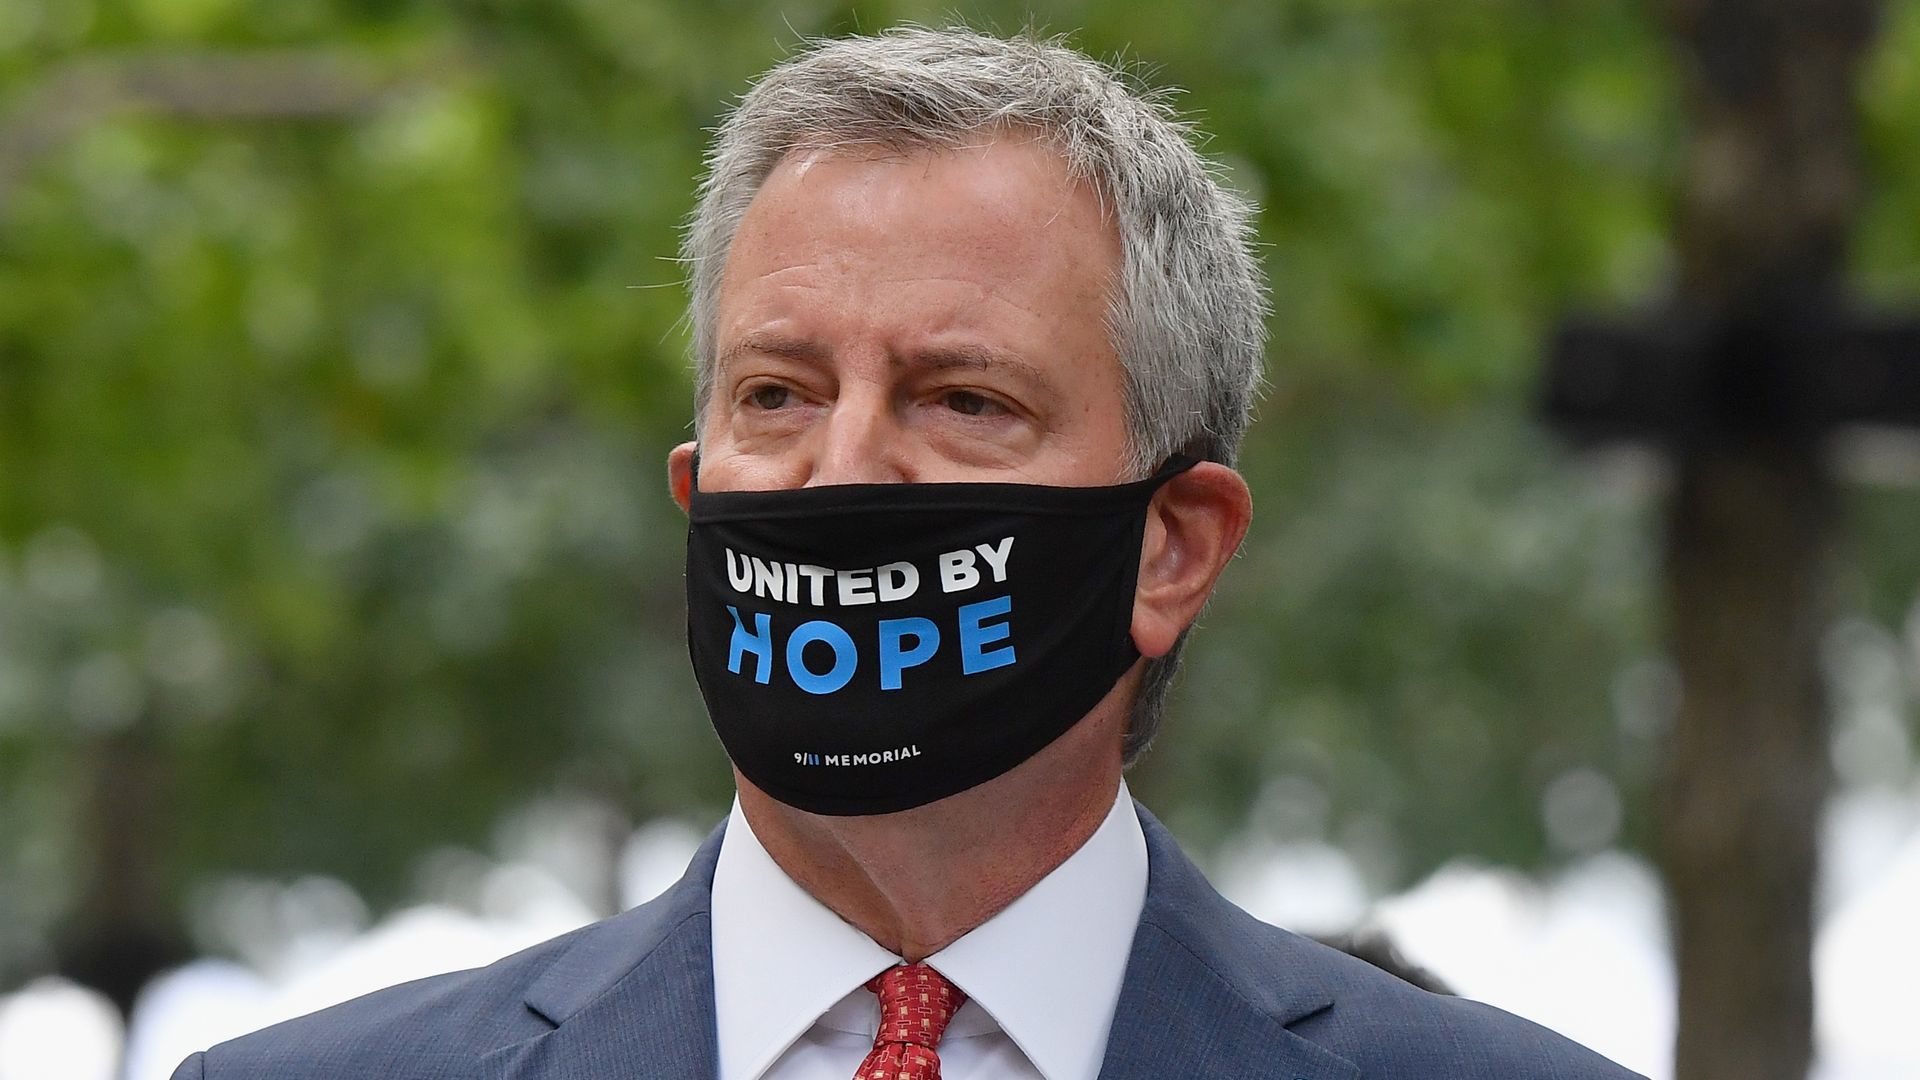 Mayor Bill de Blasio wears a face mask that reads "stand by hope" 